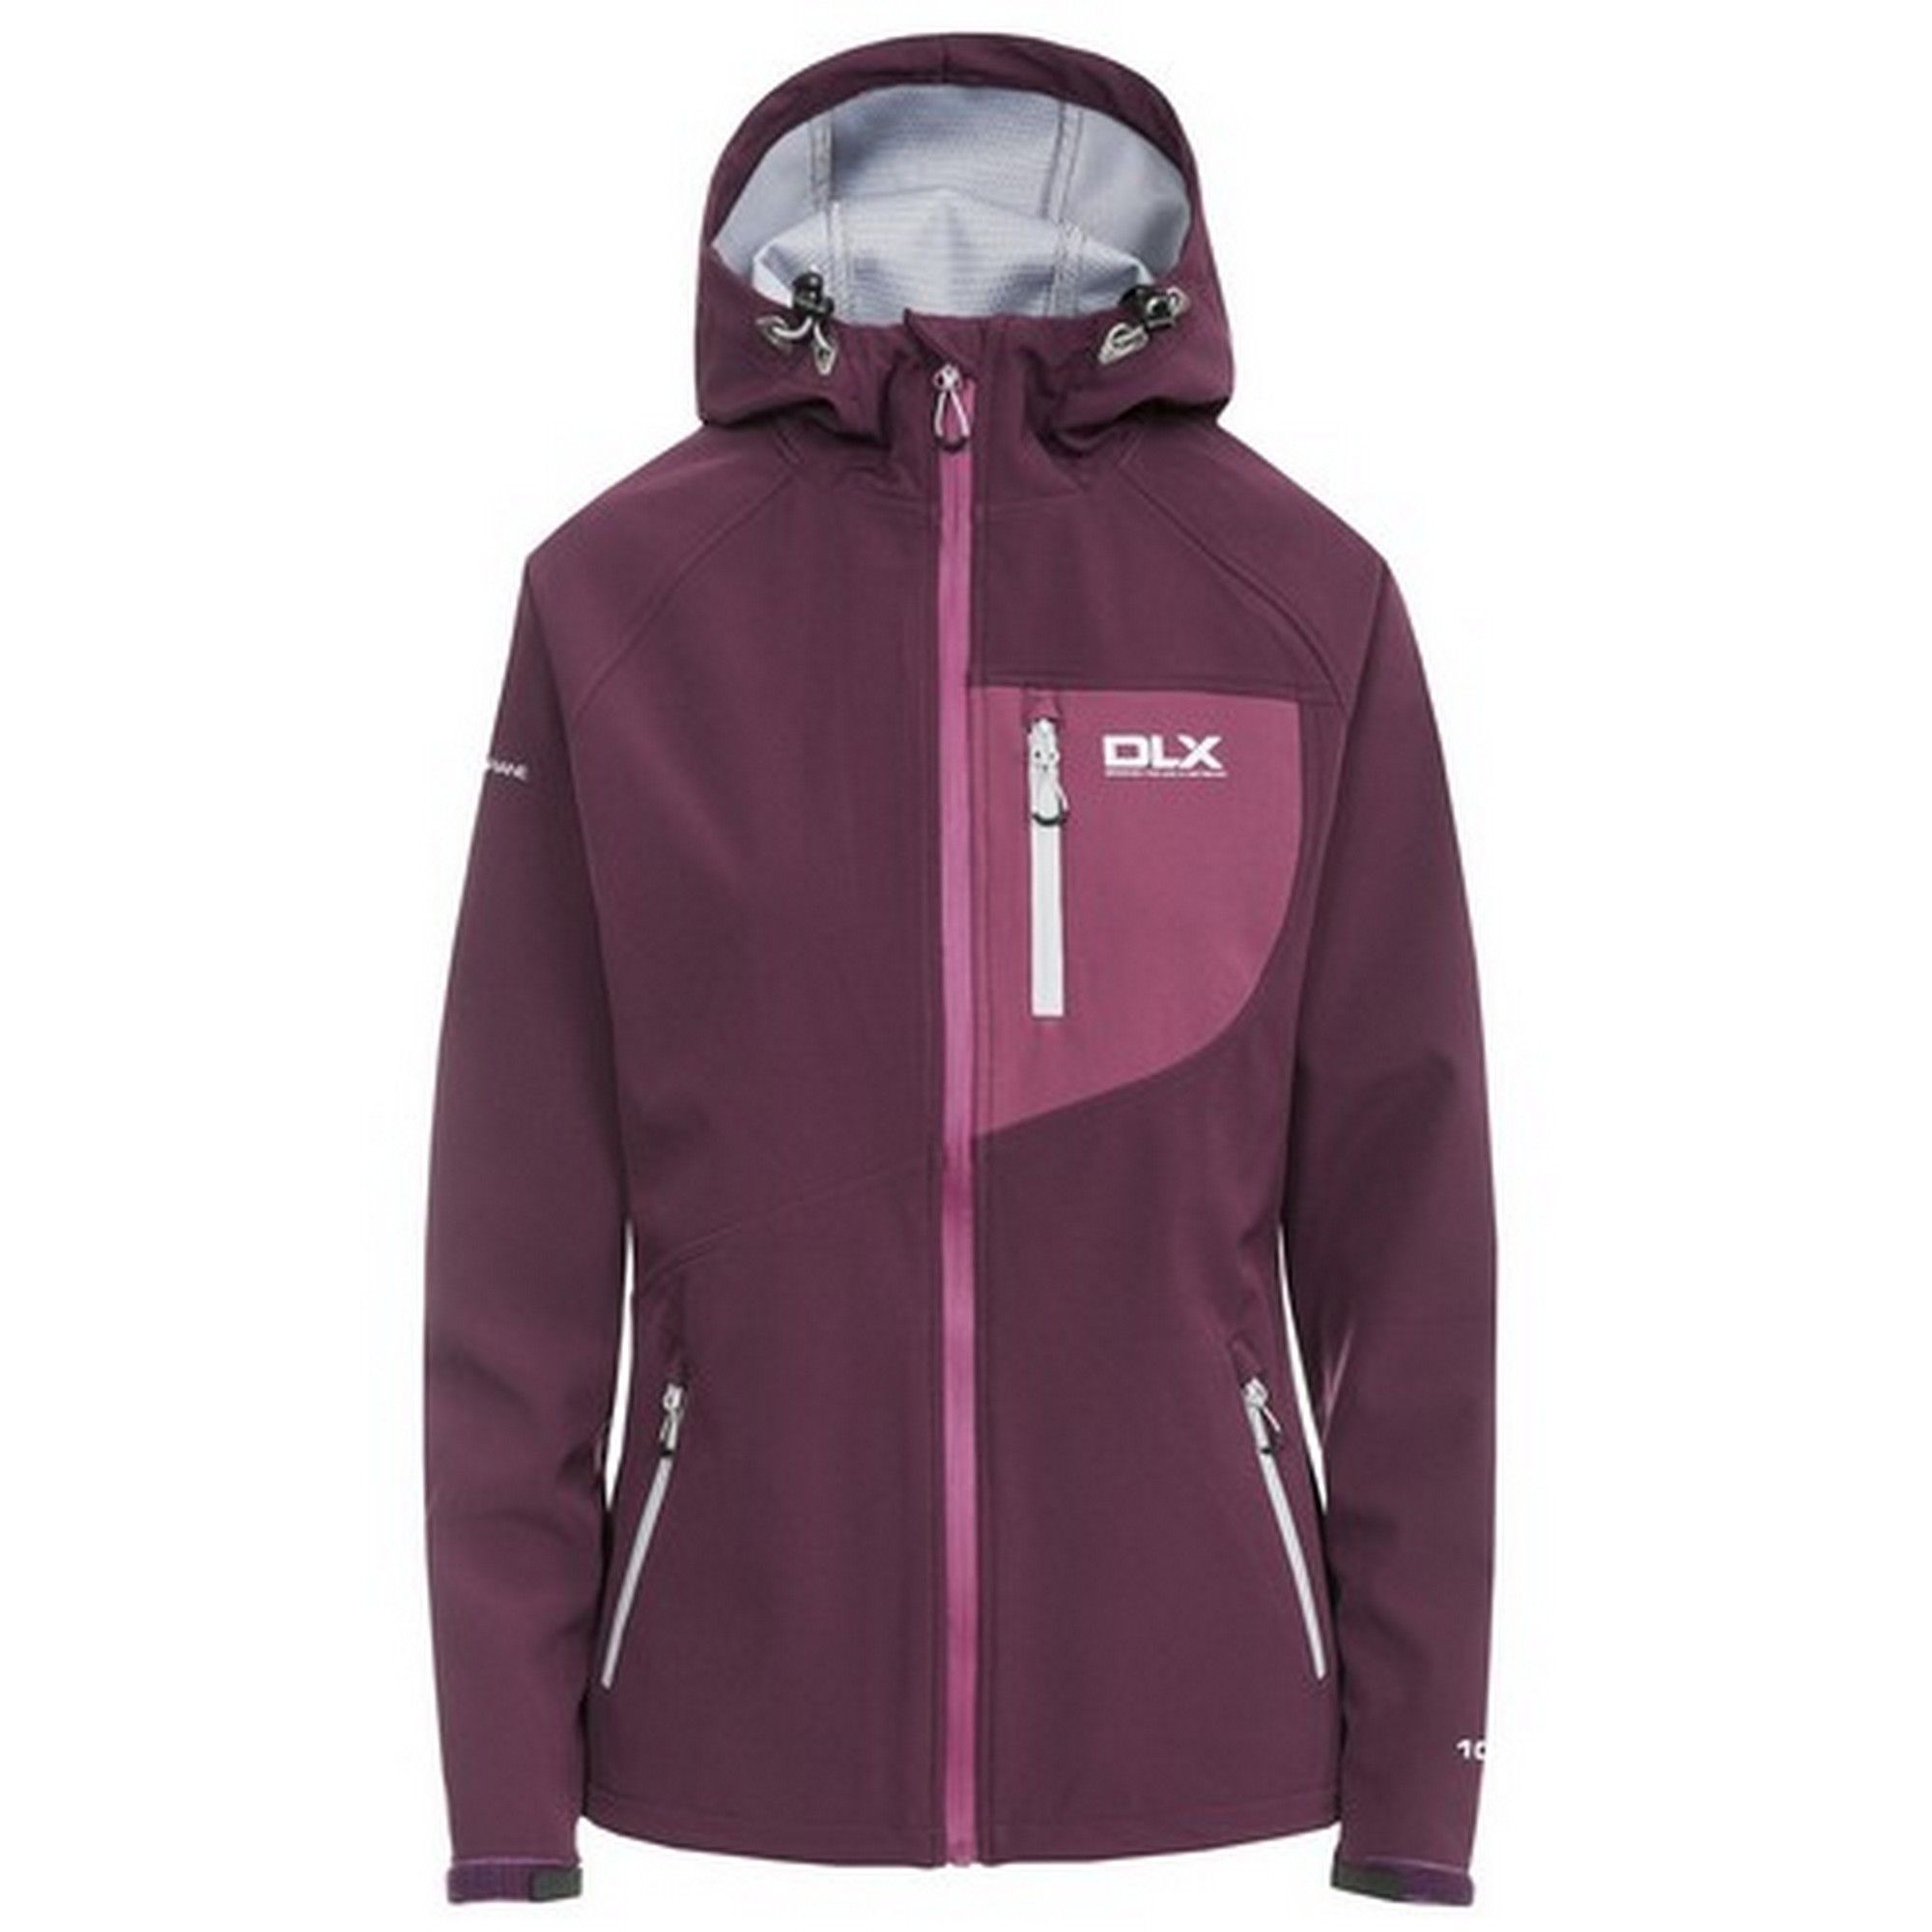 Adjustable grown on hood. Water repellent front zip. 3 water repellent zip pockets. Drawcord at hem. Chin guard. Flat cuff with adjustable moulded tab. Contrast fabric backing. Waterproof 1000mm, breathable 5000mvp. 95% Polyester, 5% Elastane, TPU membrane. Trespass Womens Chest Sizing (approx): XS/8 - 32in/81cm, S/10 - 34in/86cm, M/12 - 36in/91.4cm, L/14 - 38in/96.5cm, XL/16 - 40in/101.5cm, XXL/18 - 42in/106.5cm.